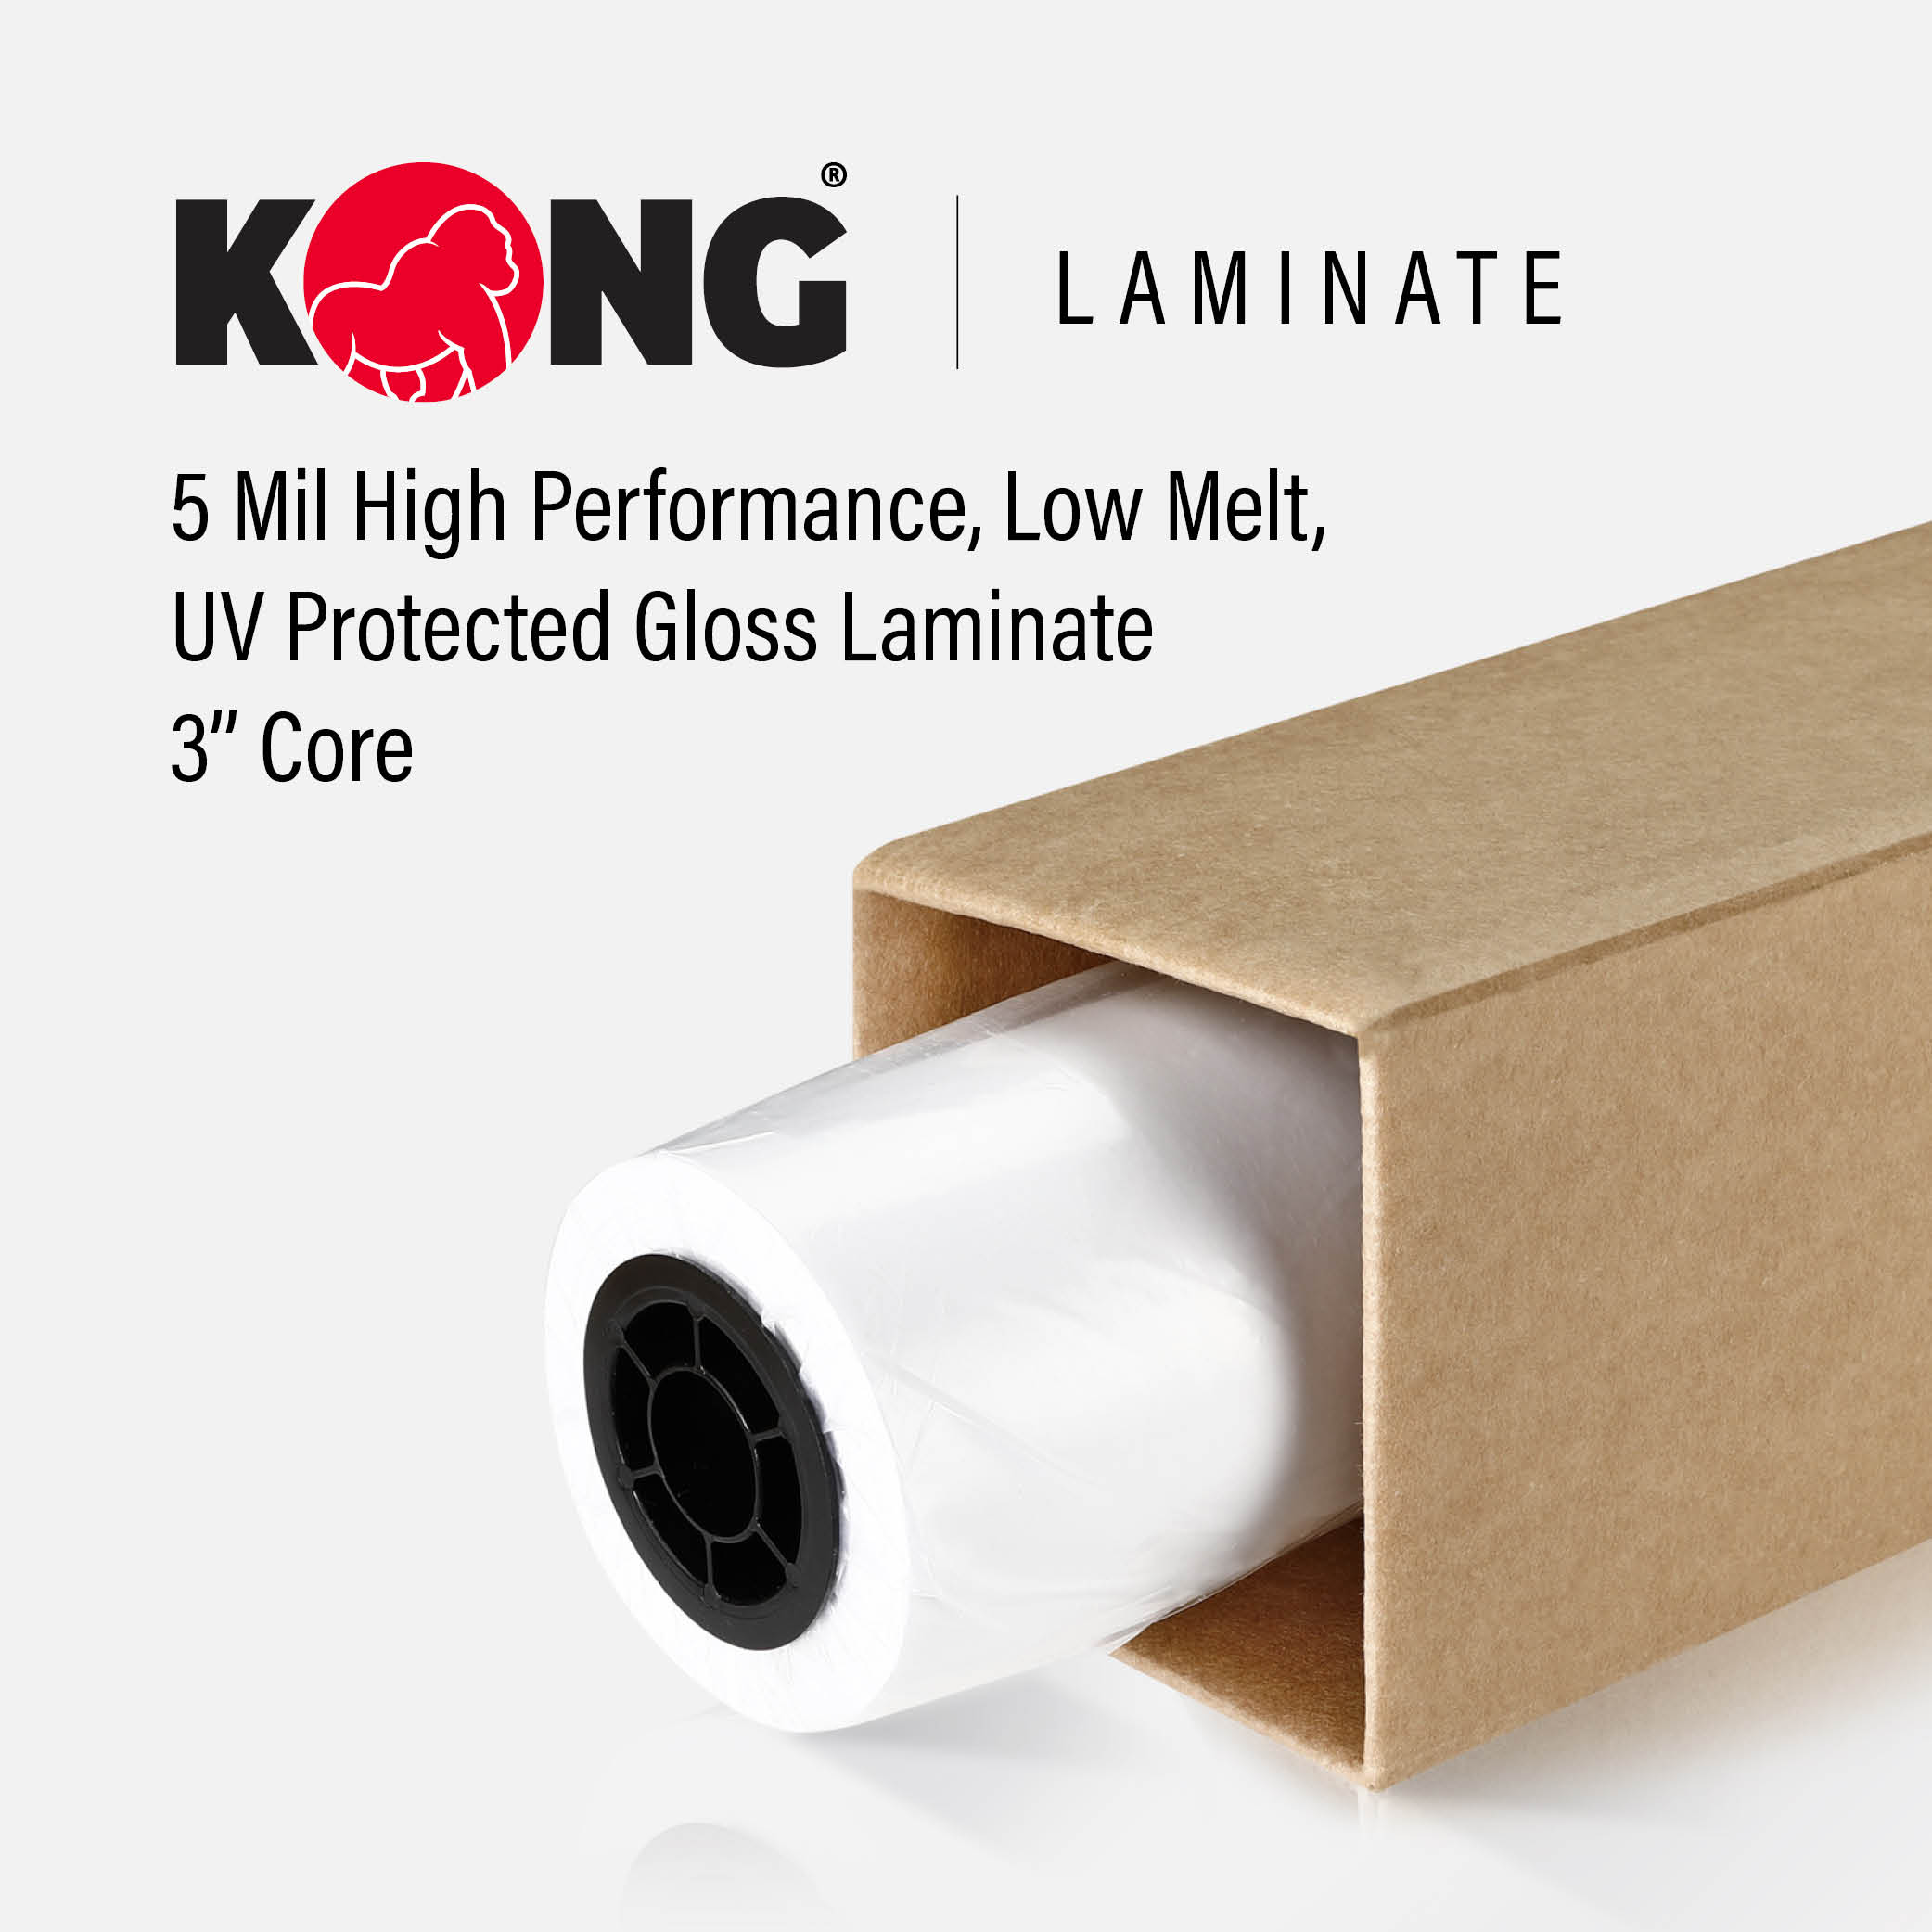 43'' x 250' Roll - 5 MIL High Performance, Low Melt, UV Protected Gloss Laminate - 3'' Core